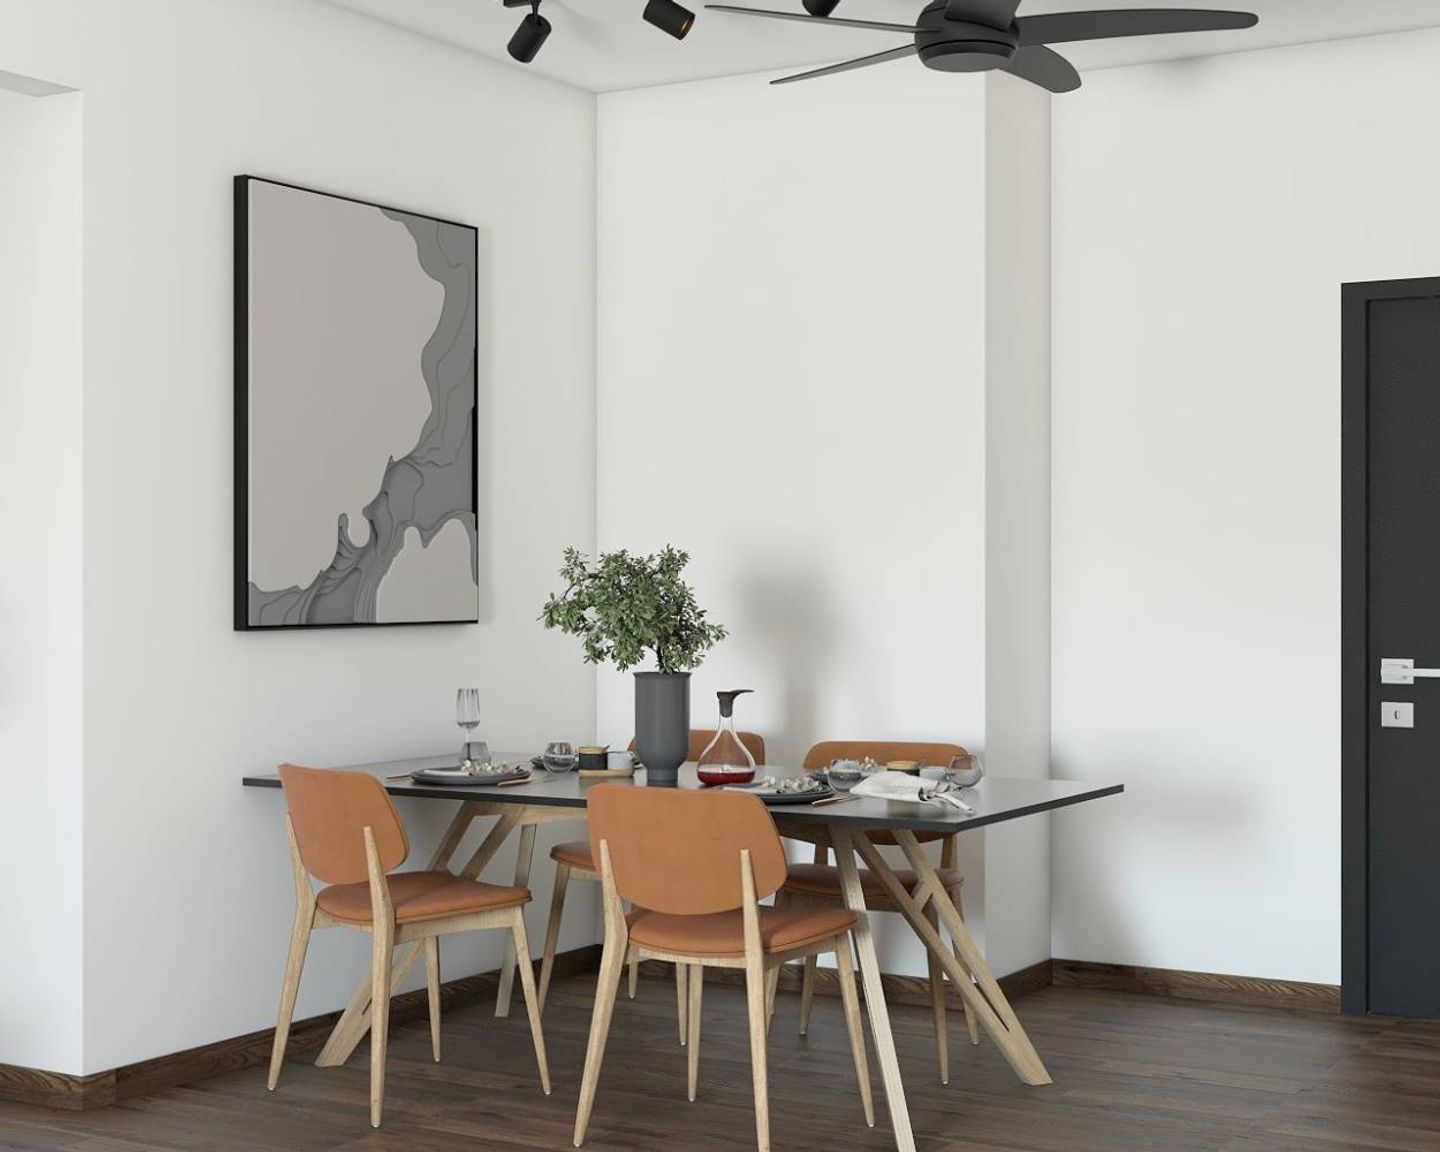 Dining Room Design With Dark Wood And Tan Chairs - Livspace